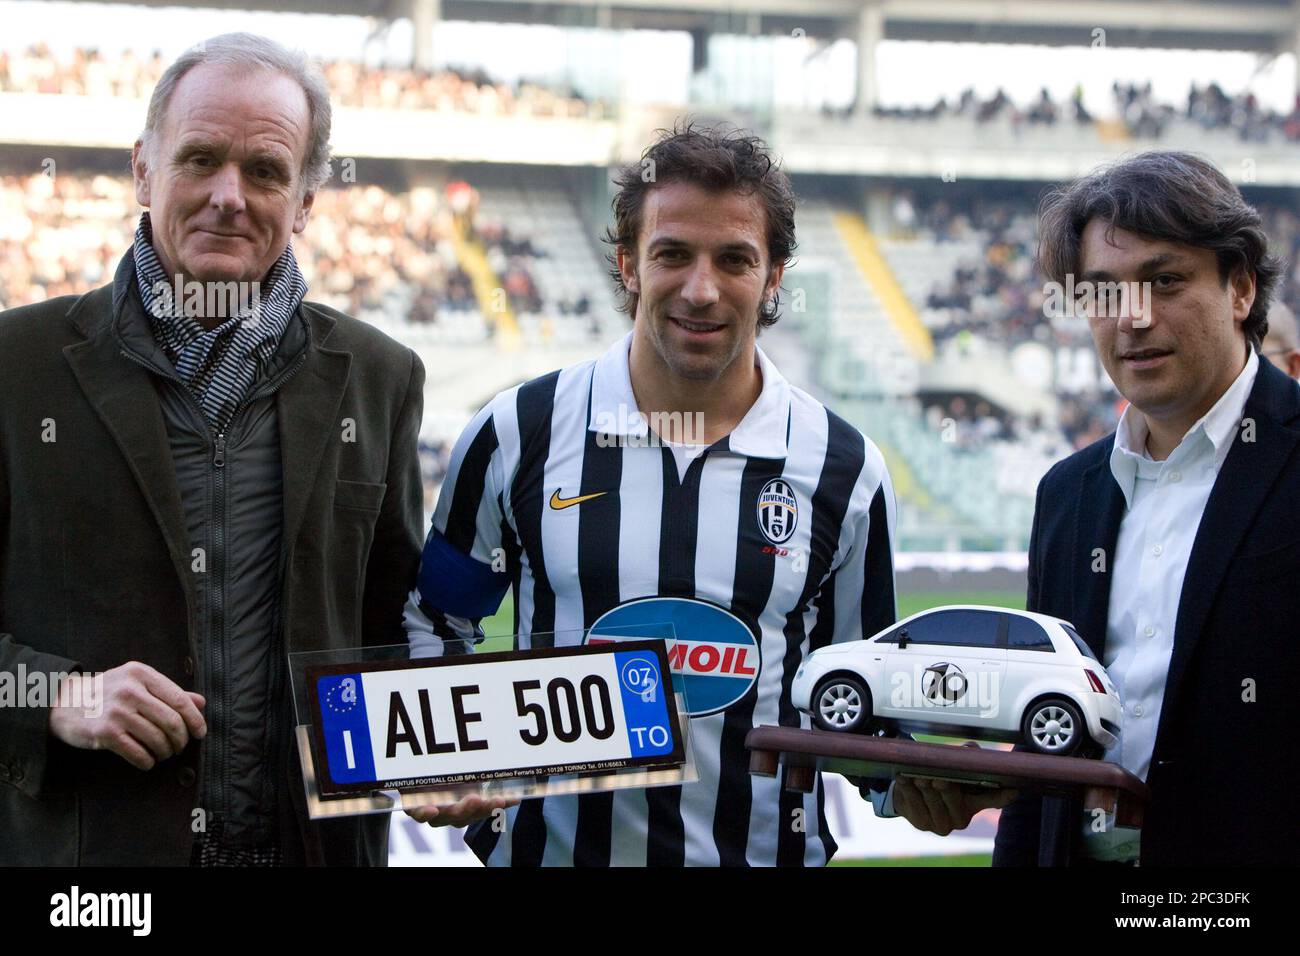 juventus-alessandro-del-piero-center-receives-a-model-of-the-new-fiat-500-car-from-fiat-marketing-director-luca-de-meo-righ.jpg